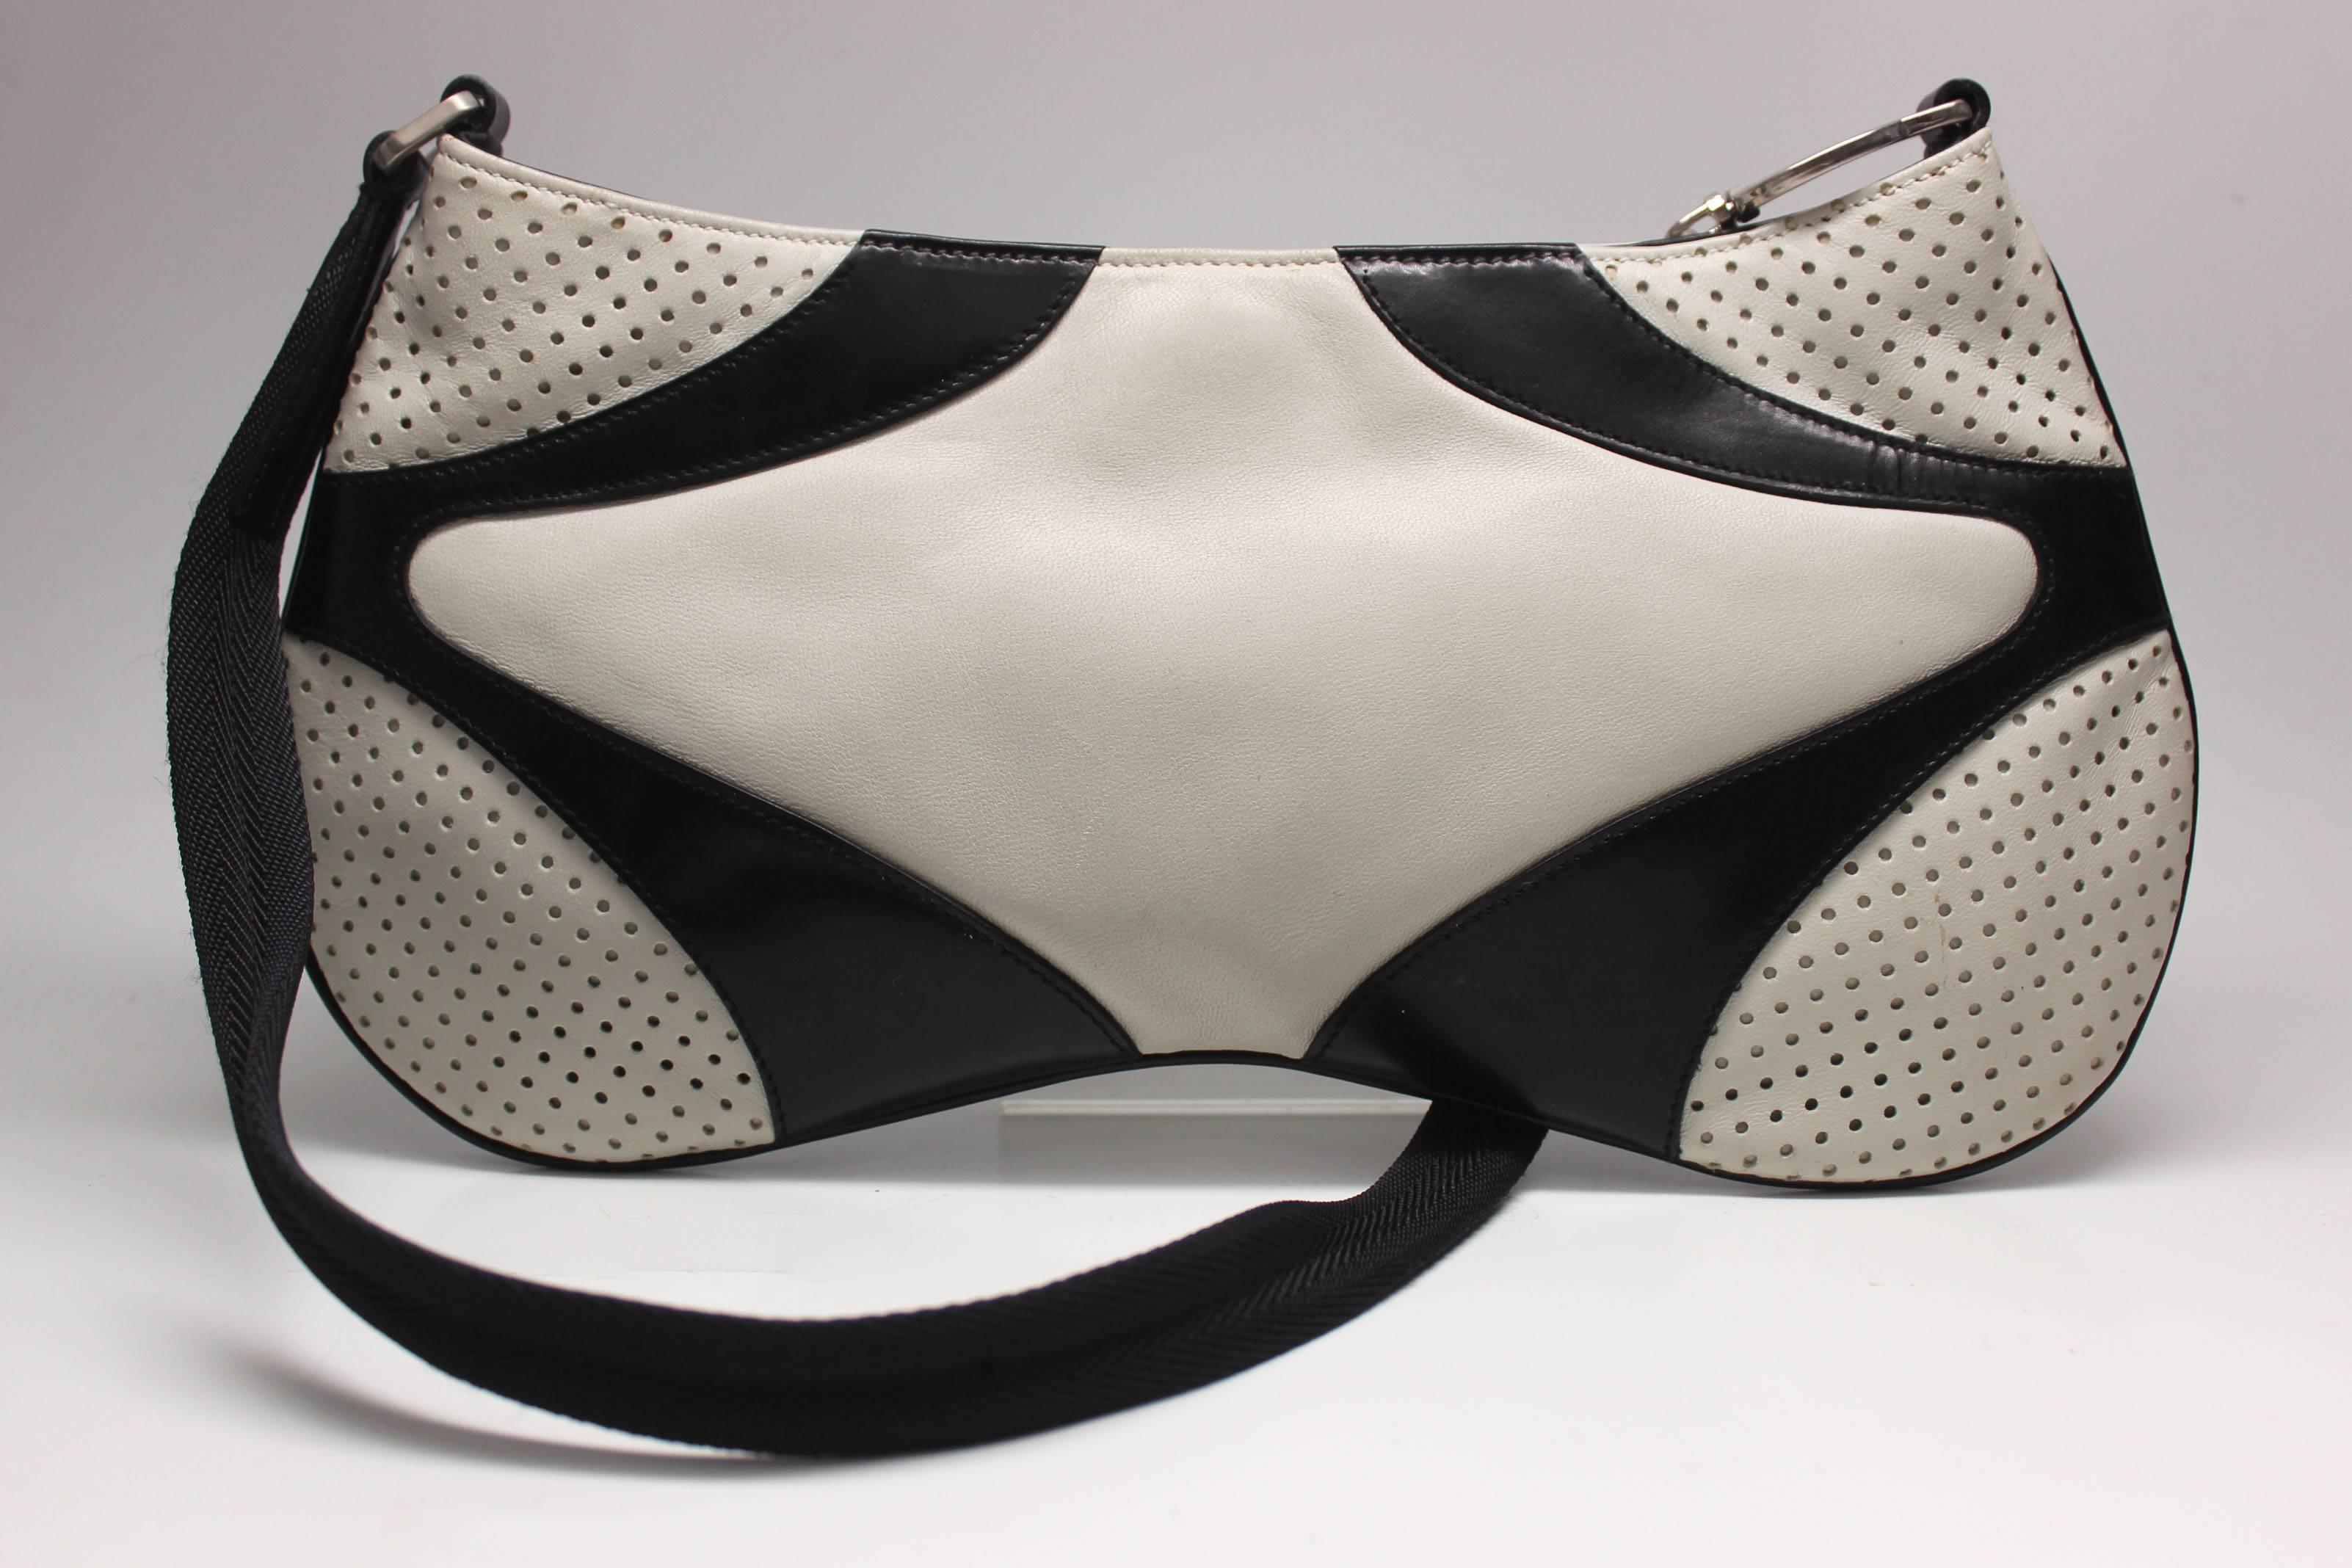 This sporty prada baguette has a mix of 3 different leathers. A supple creme, black and a creme perforated texture. The strap is black webbing with leather and metal hardware details.  The strap measures 24 inches.  There is a Prada stamp on the top